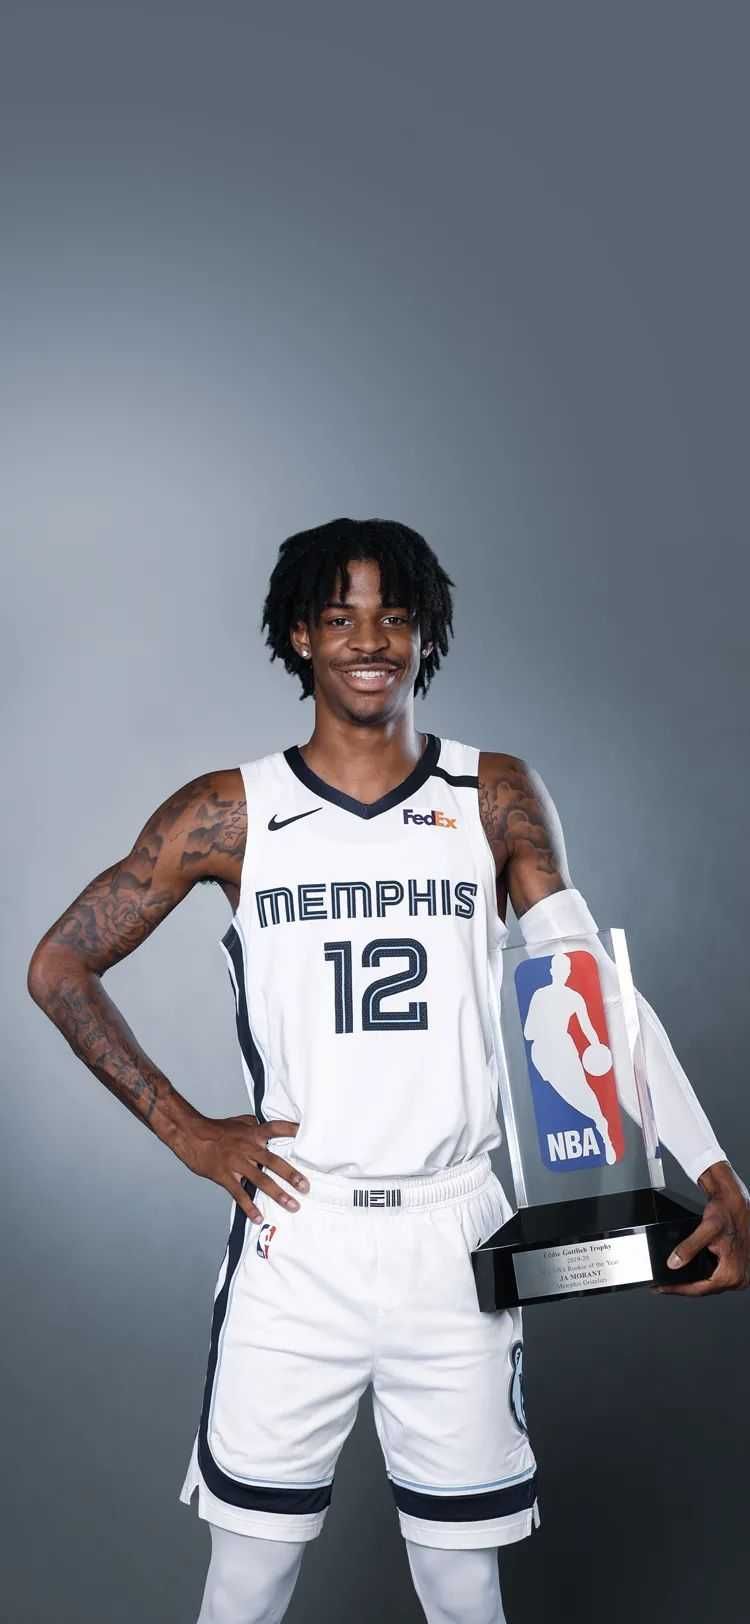 Ja Morant of the Memphis Grizzlies holds the 2020-21 NBA Rookie of the Year trophy. - Ja Morant